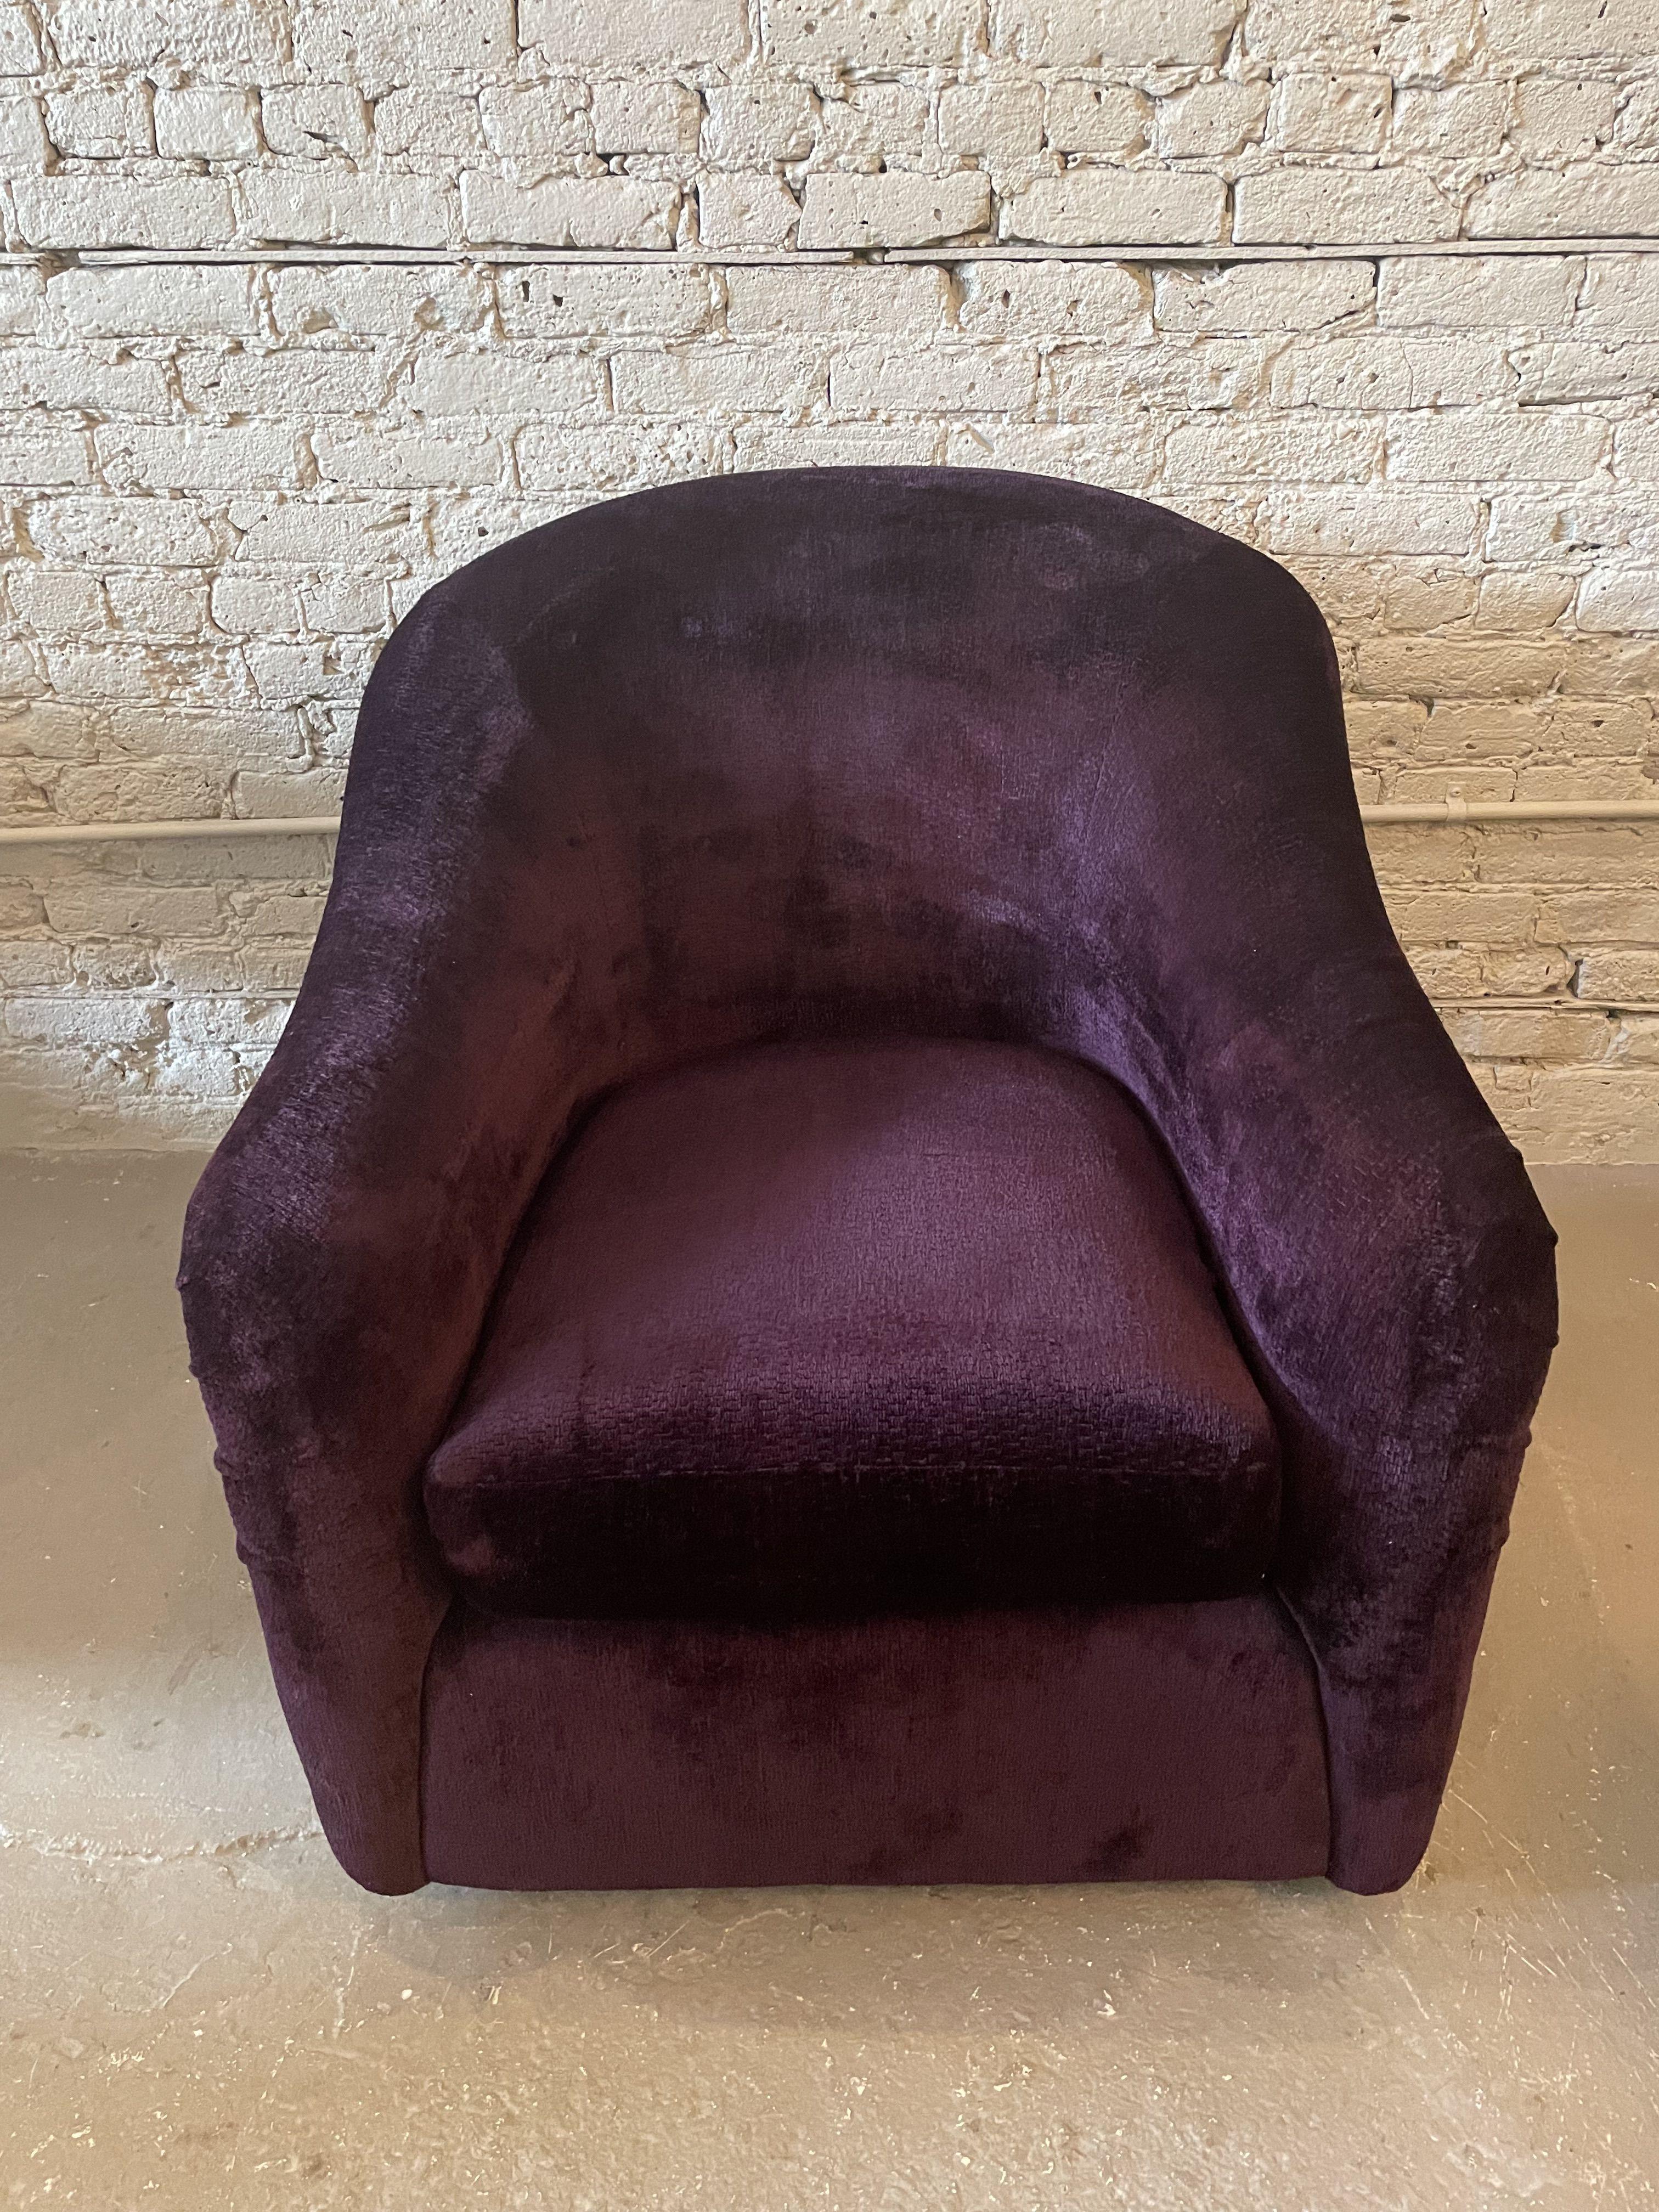 Textile Vintage A Rudin Swivel Chairs